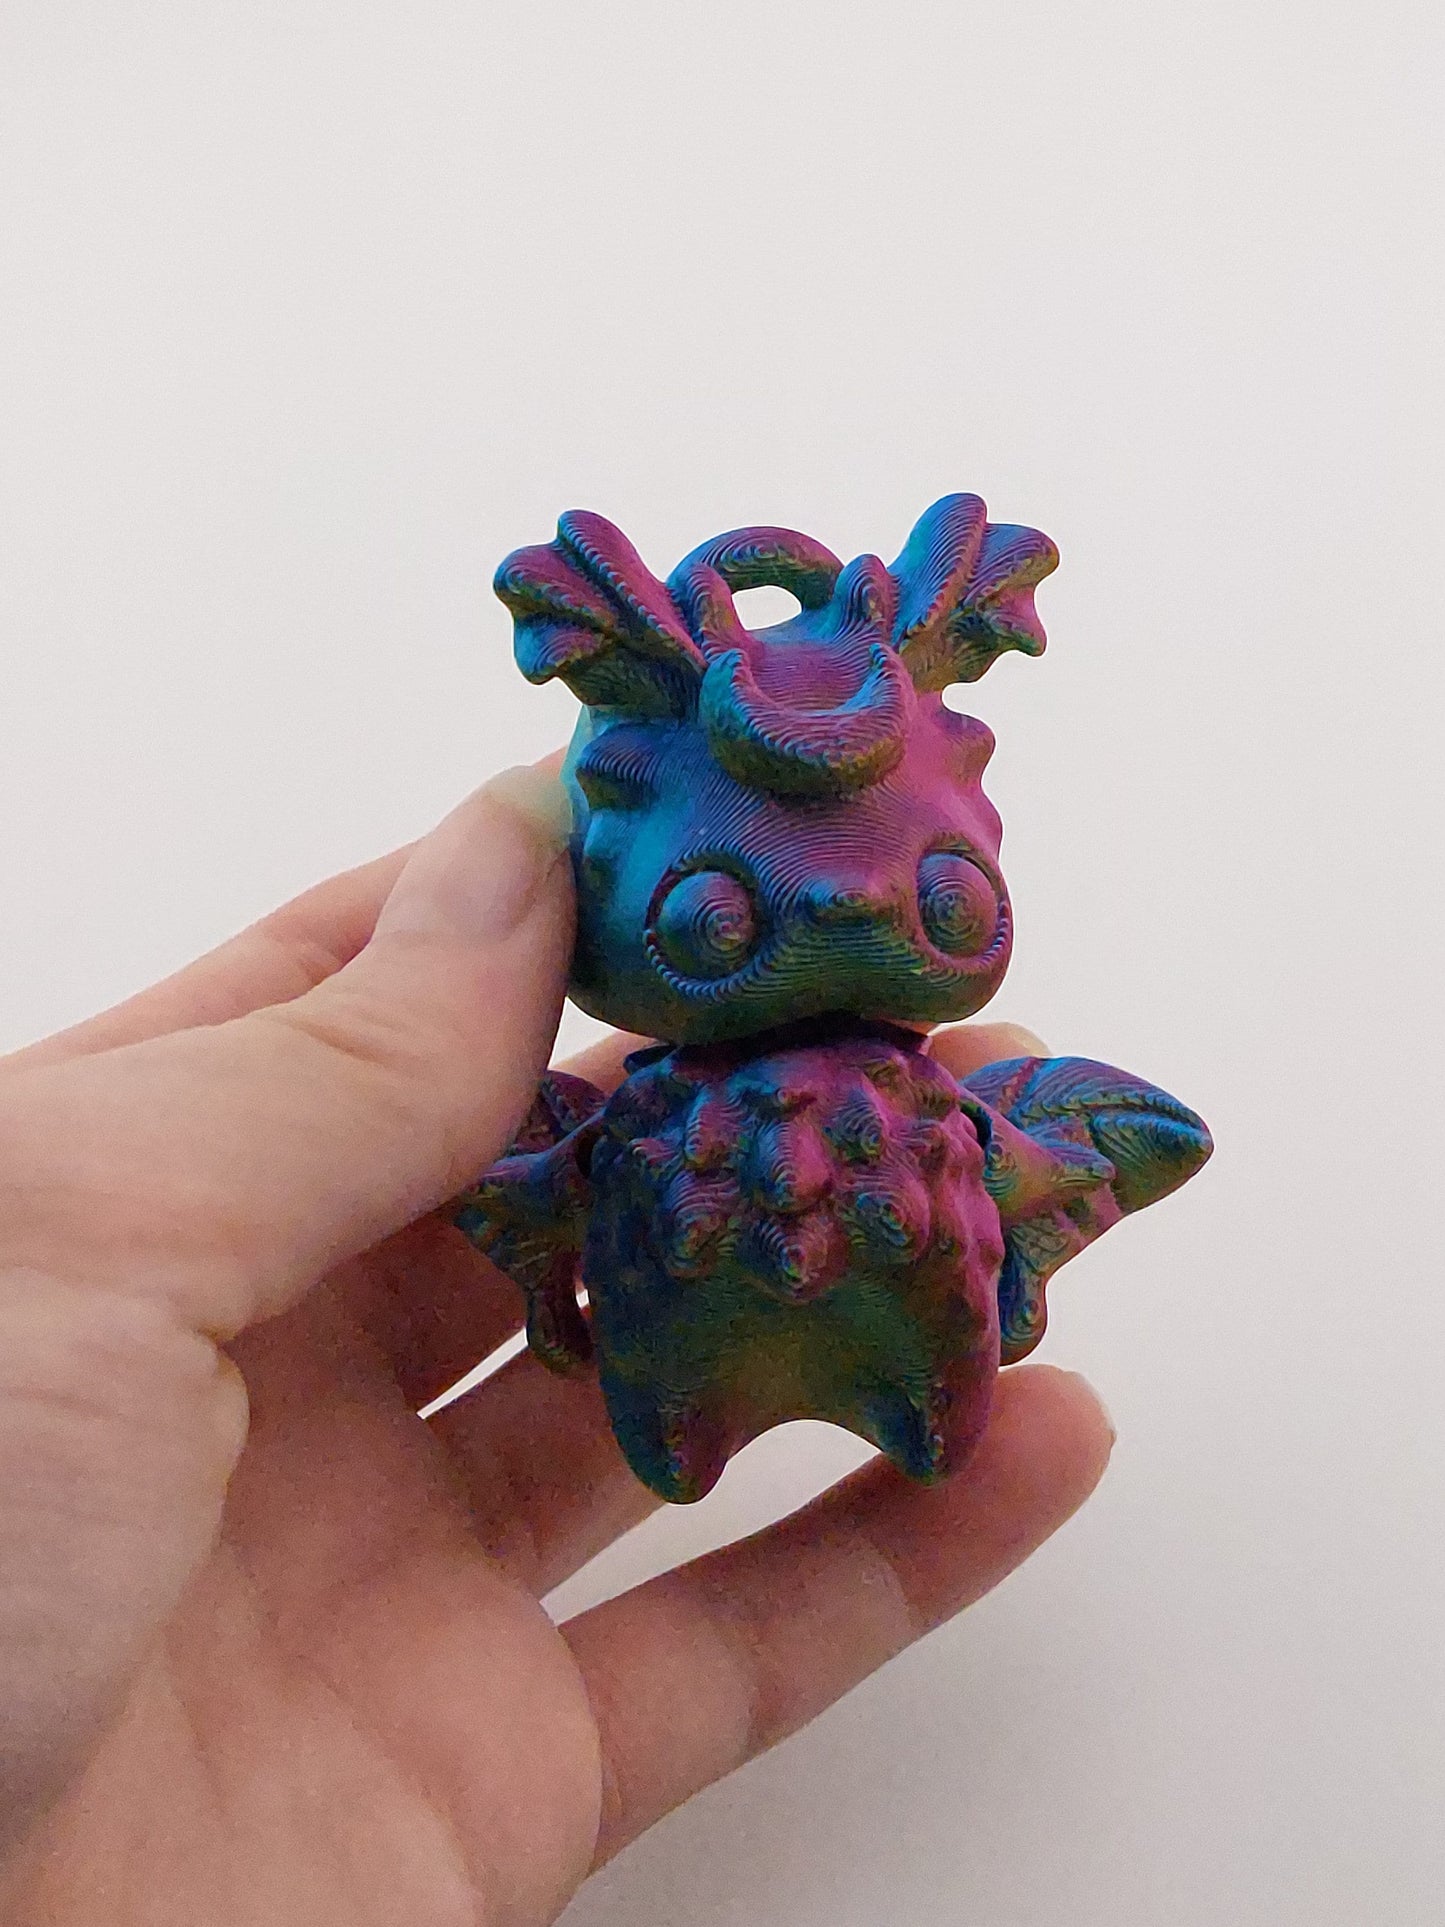 1 Articulated Forest Moth Man Pixie -- Keychain Decor Gift - 3D Printed Fidget Fantasy Creature - Customizable Colors - Authorized Seller